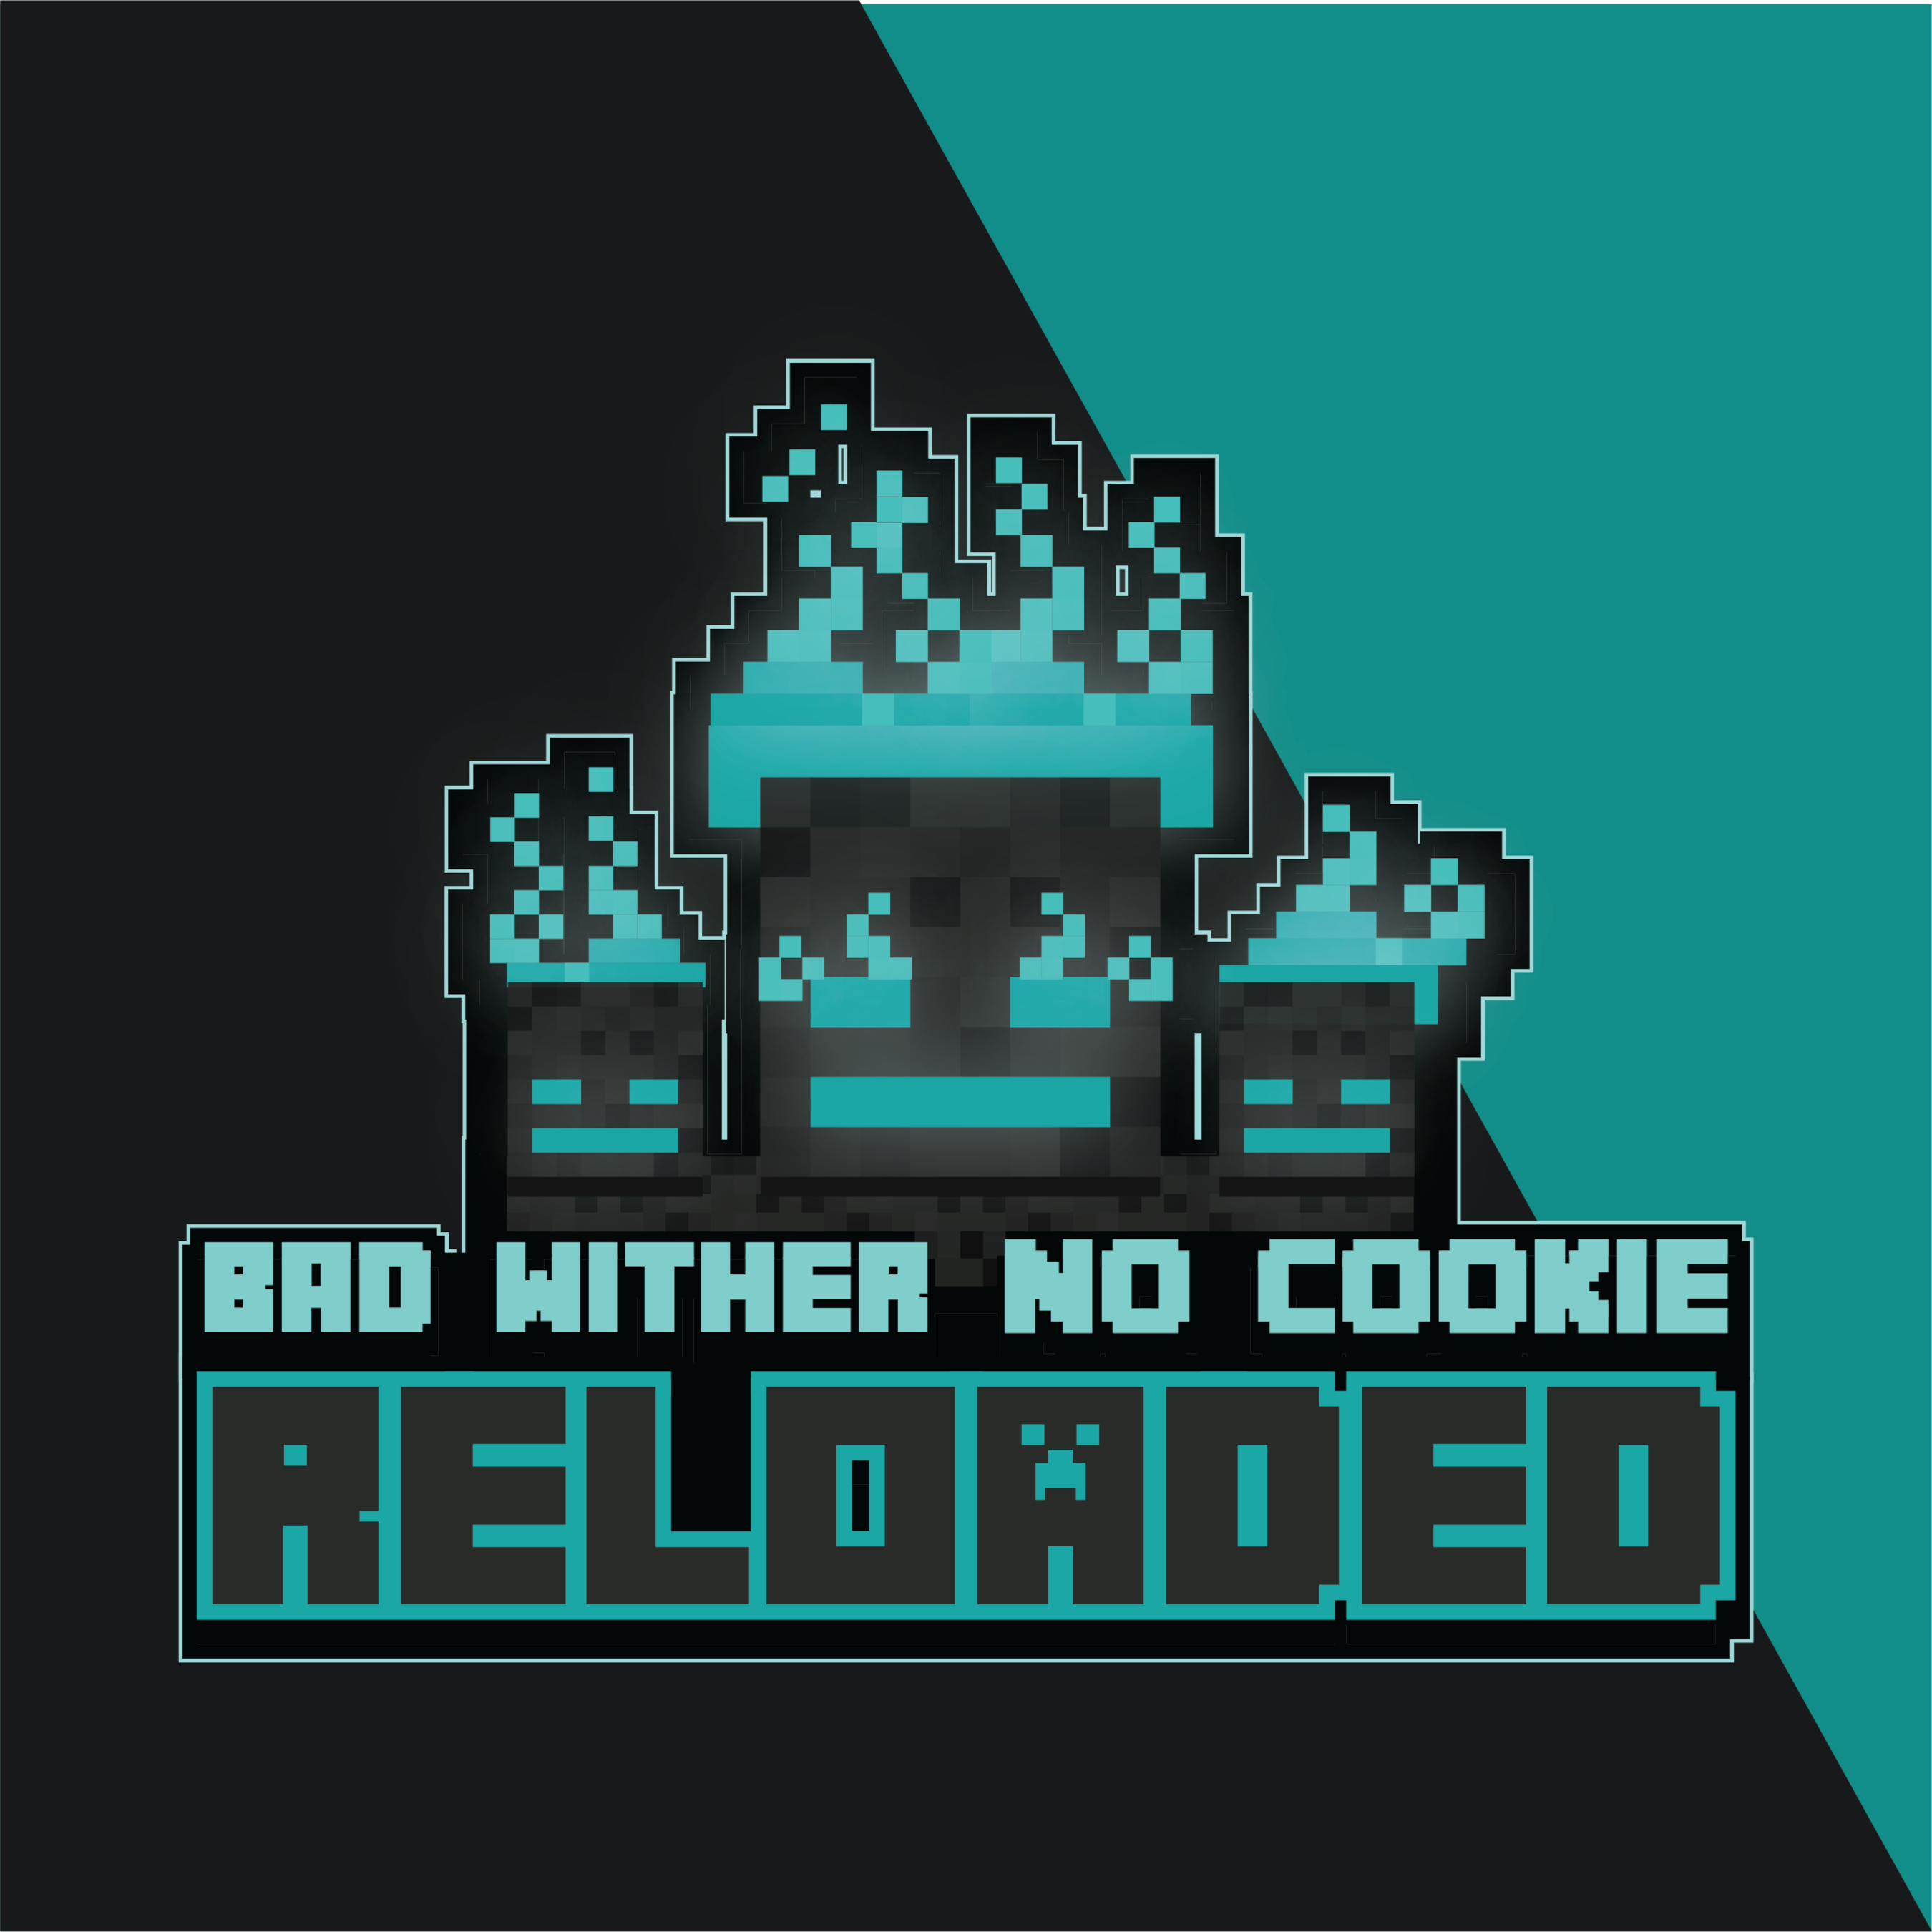 Bad Wither No Cookie - Reloaded project avatar